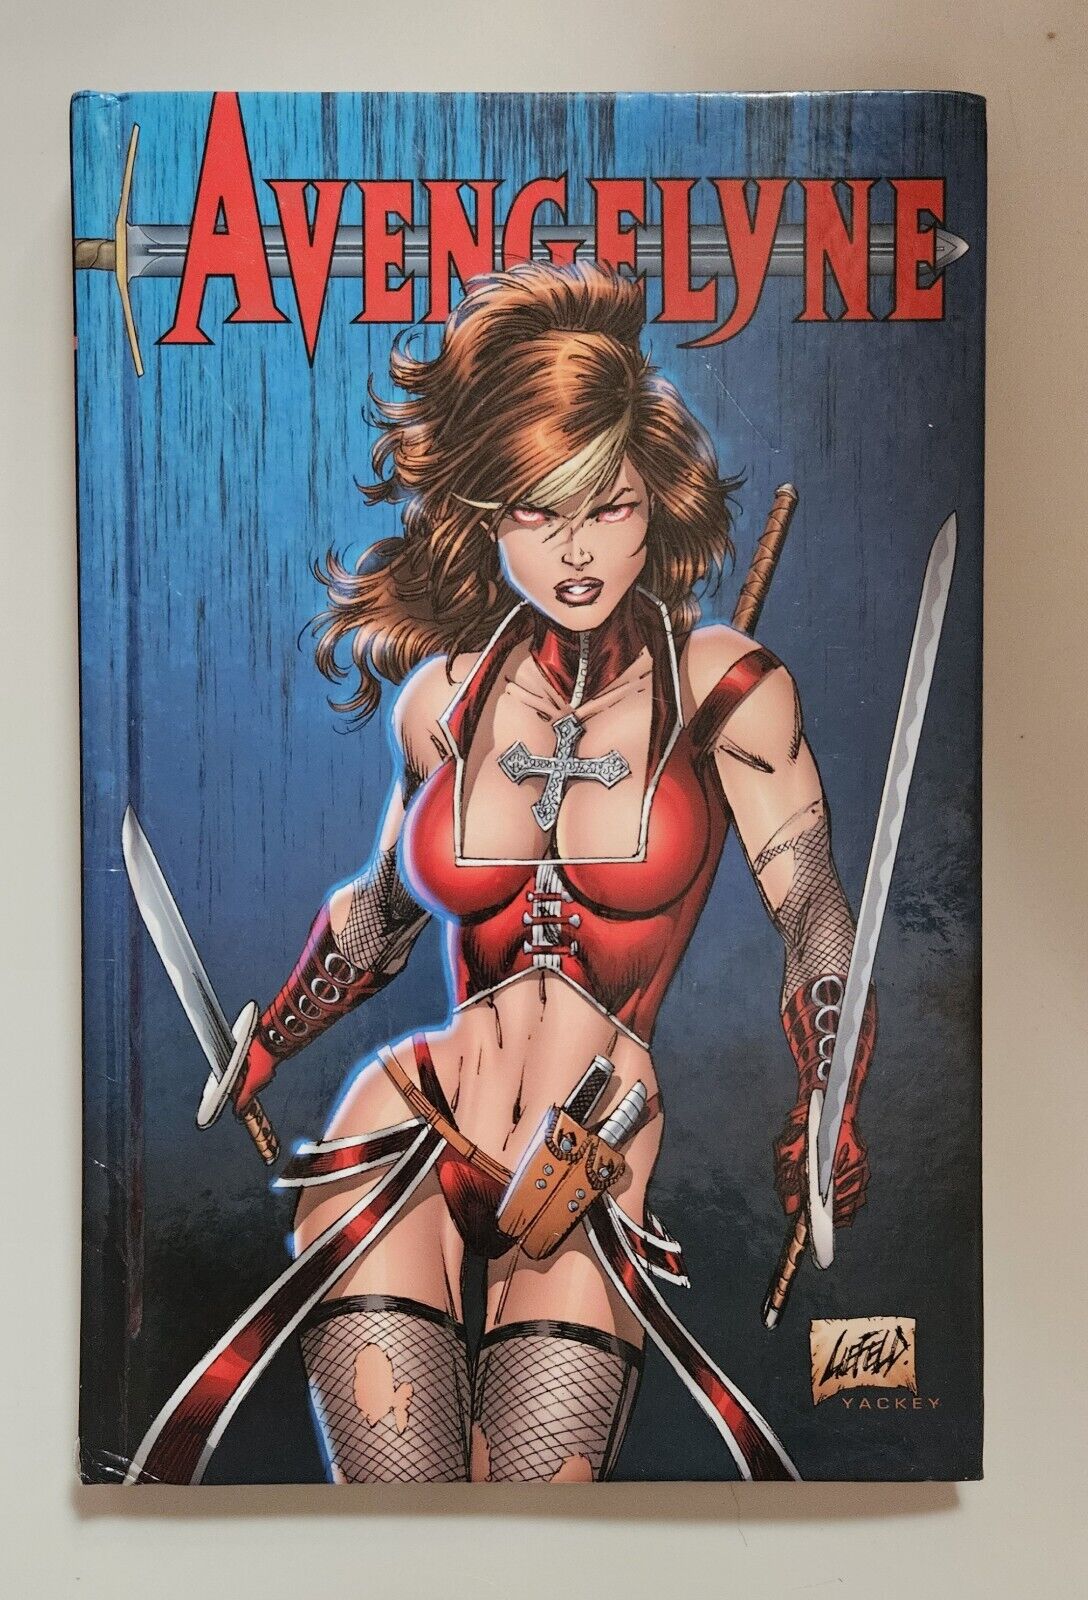 (Hardcover) AVENGELYNE by Rob Liefeld and Mark Poulton  2012